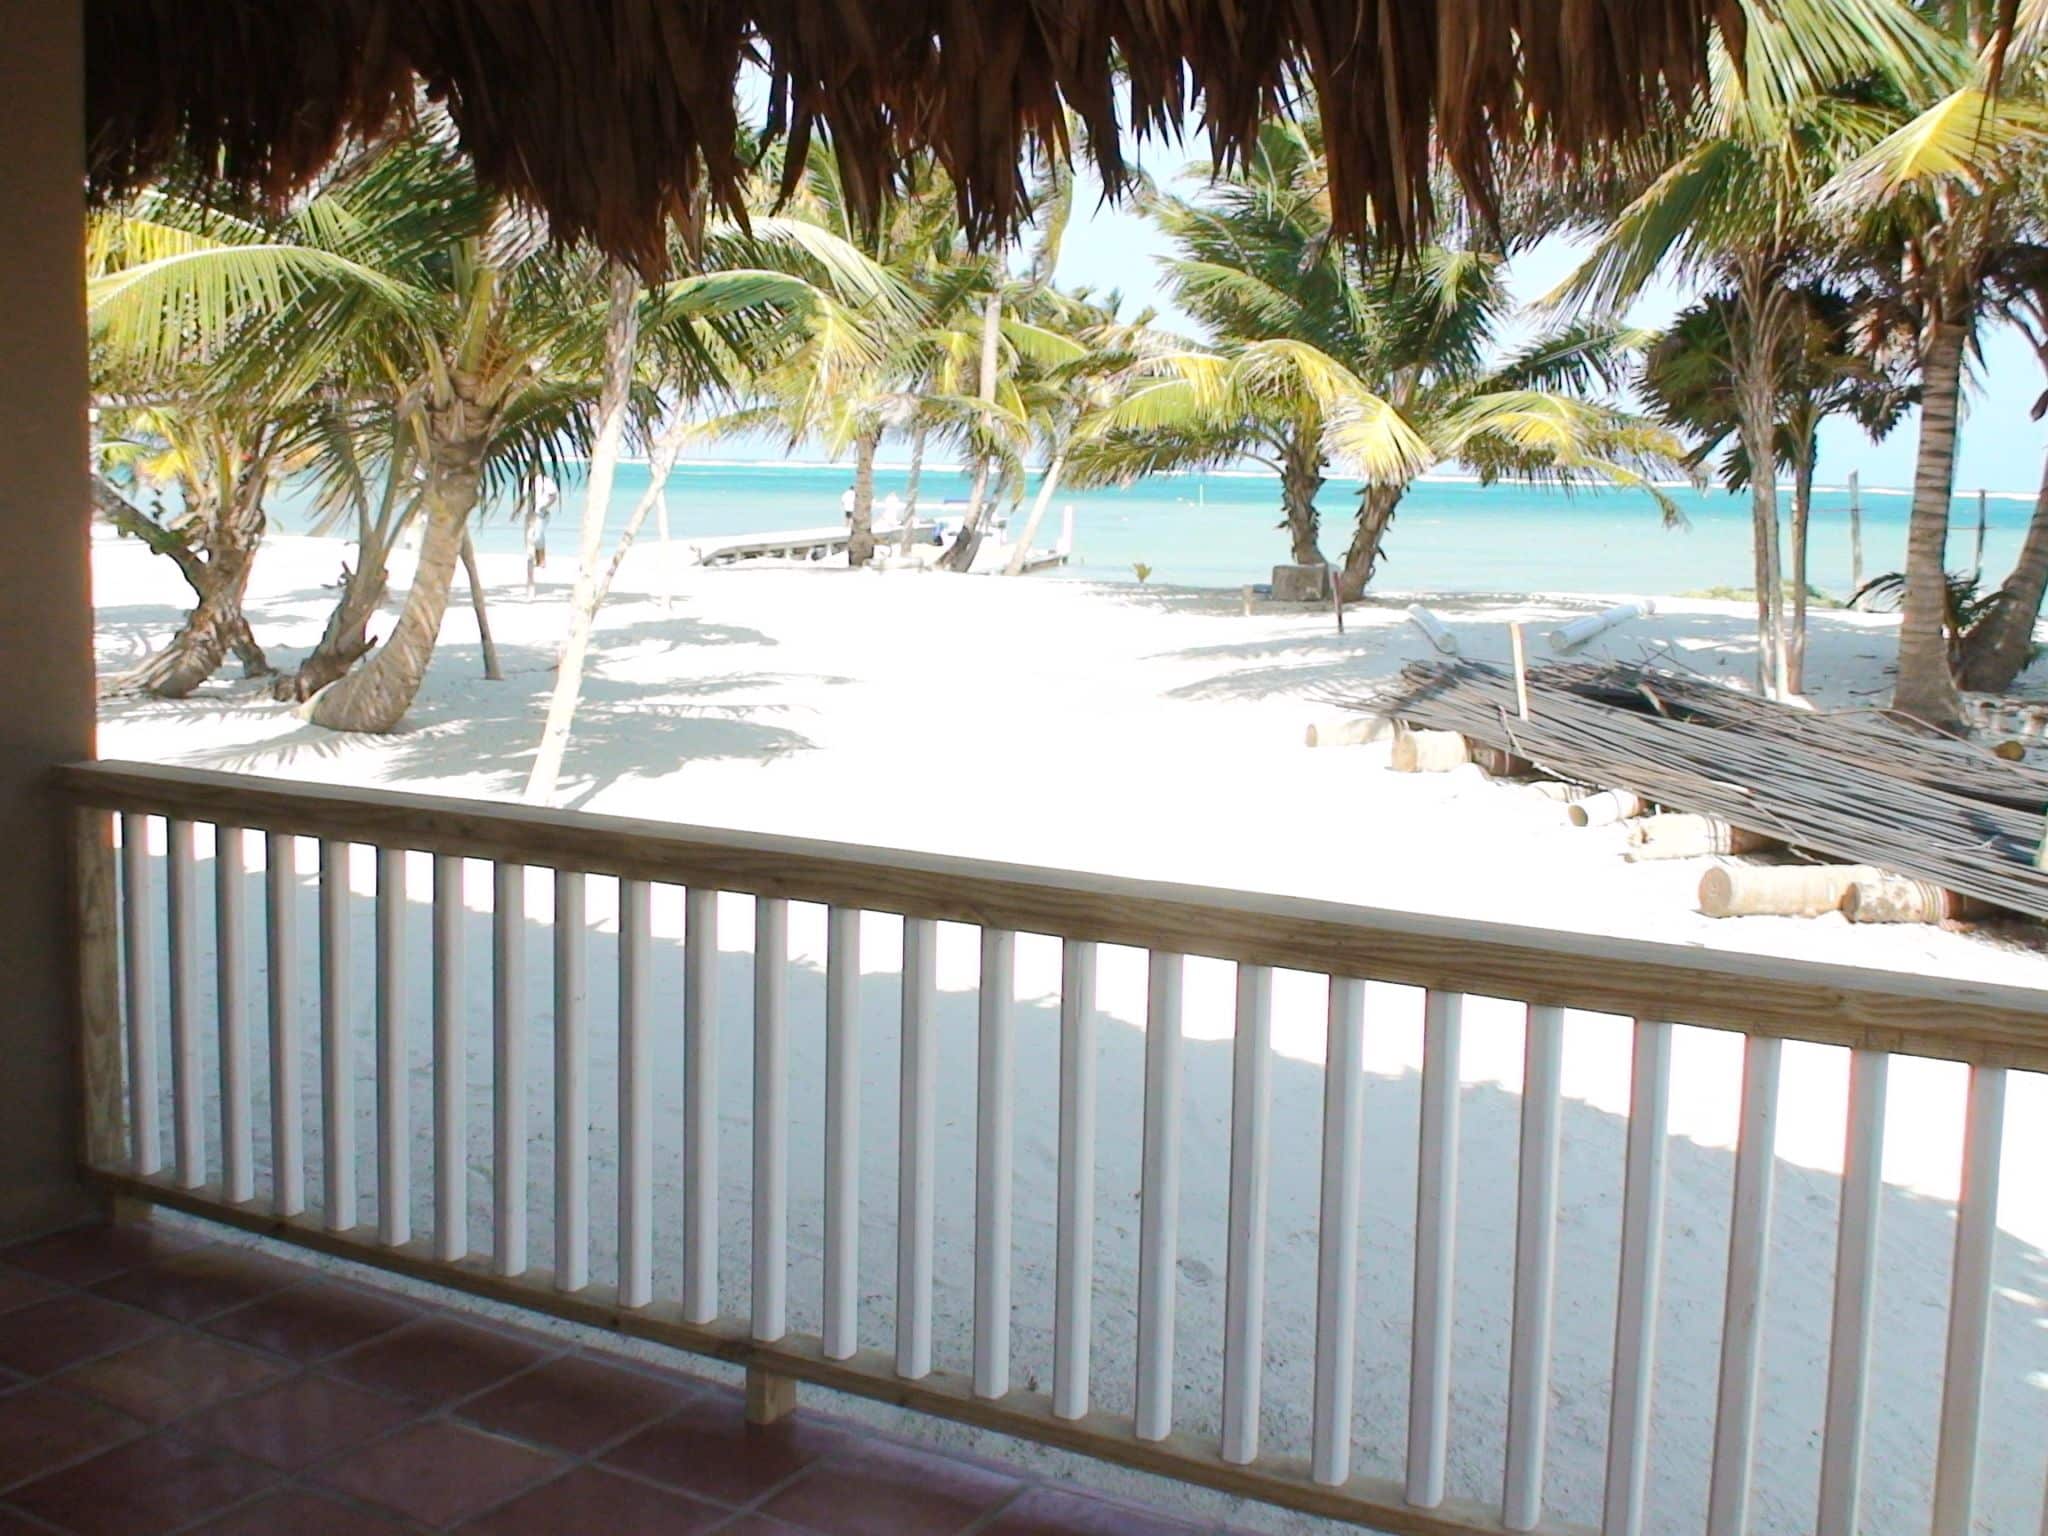 My View at Sapphire Beach, Belize